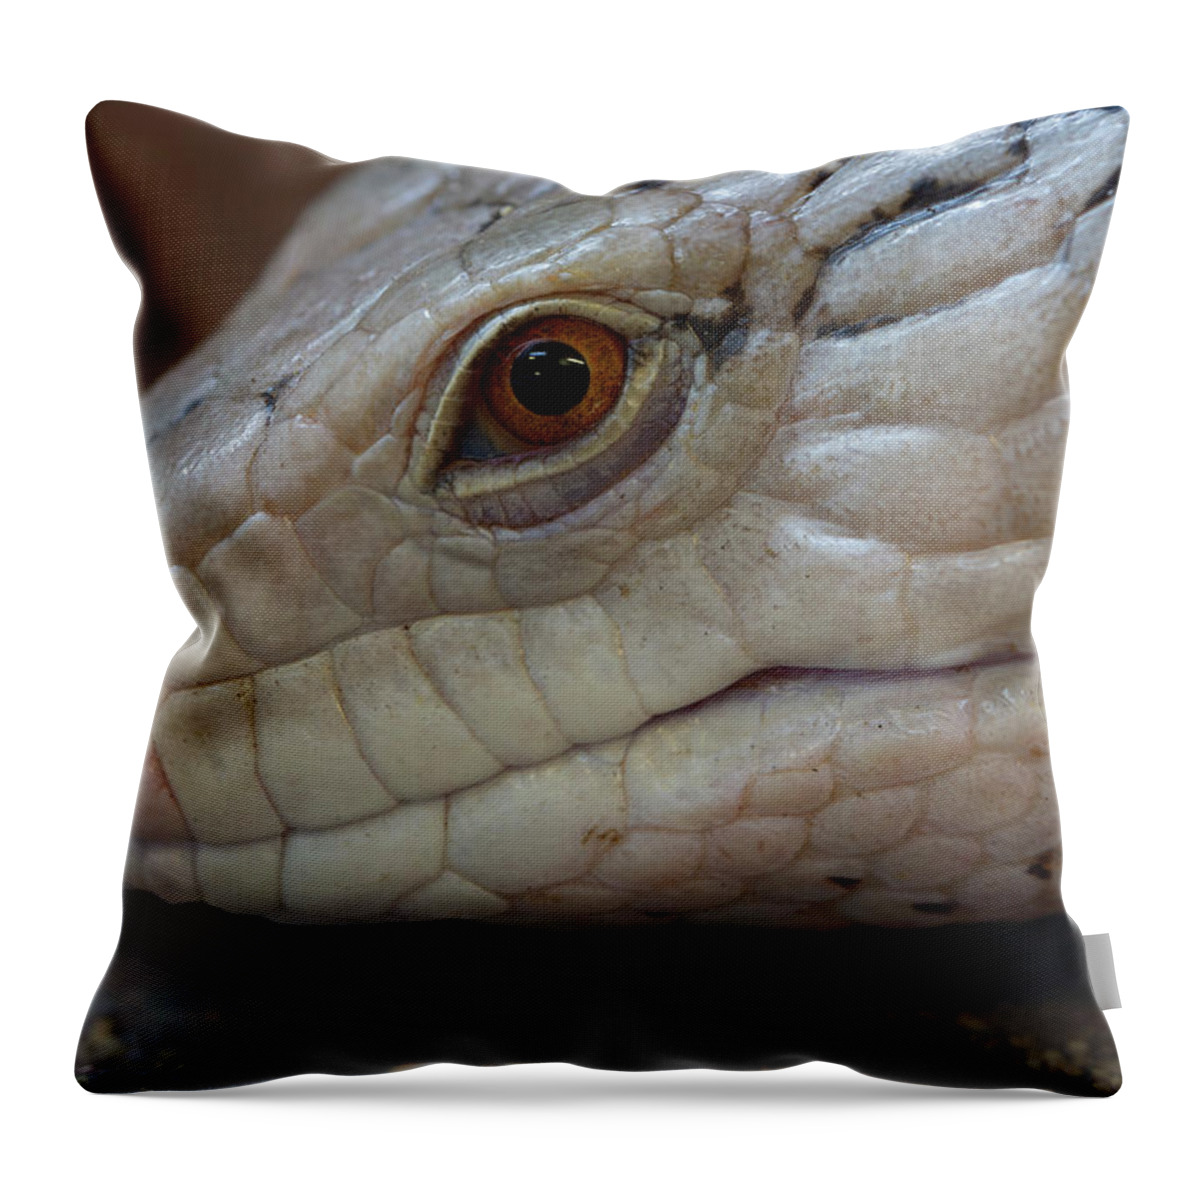 Skink Throw Pillow featuring the photograph Eastern Blue Tongued Skink by Steev Stamford